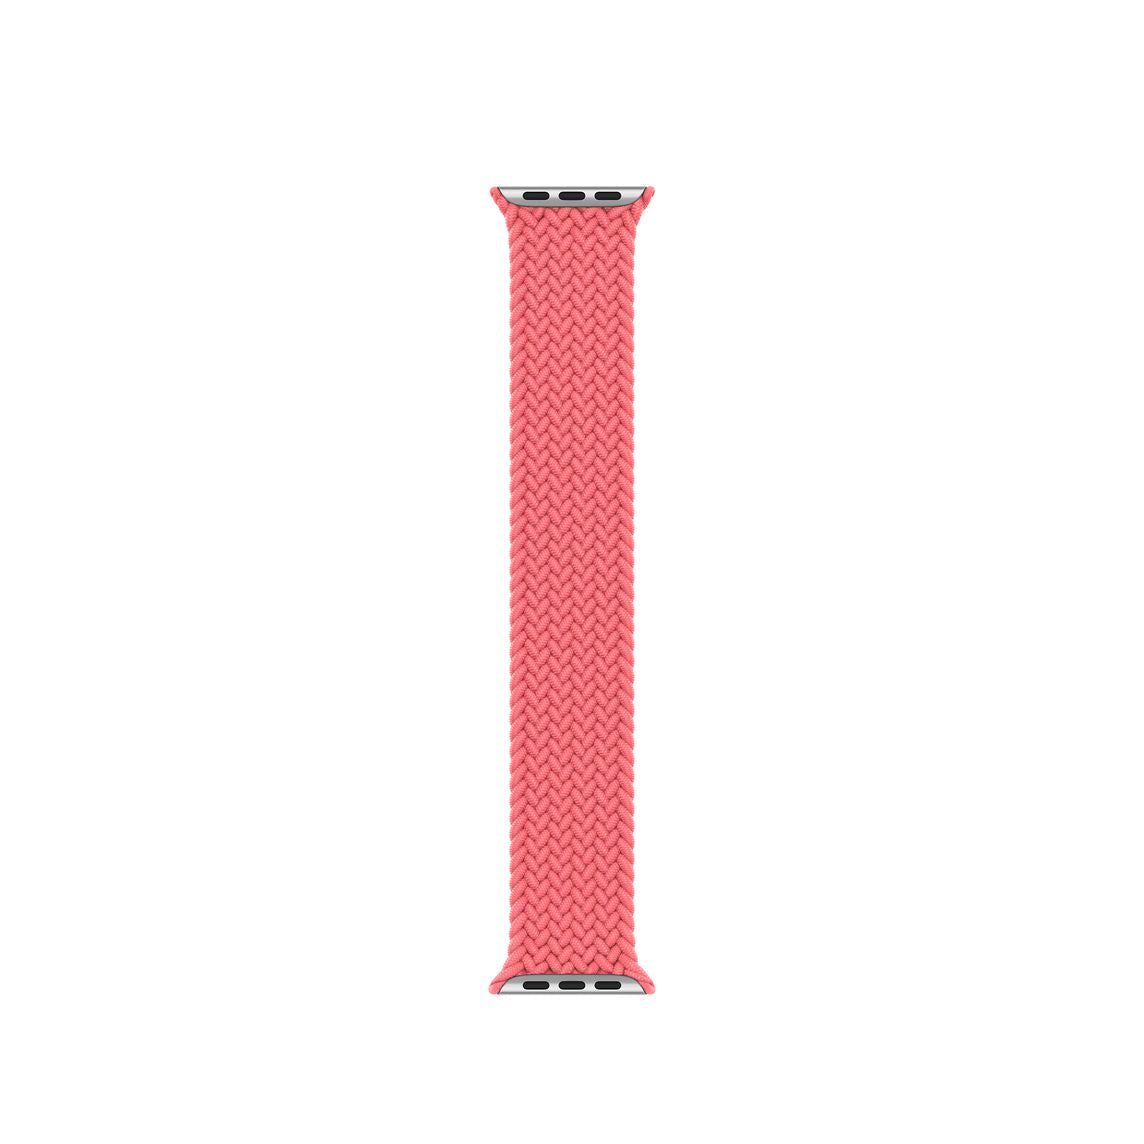 38/40/41mm New Braided Solo Loop Fabric Nylon Strap for i-Watch Series 7/6/5/4/3/2/1